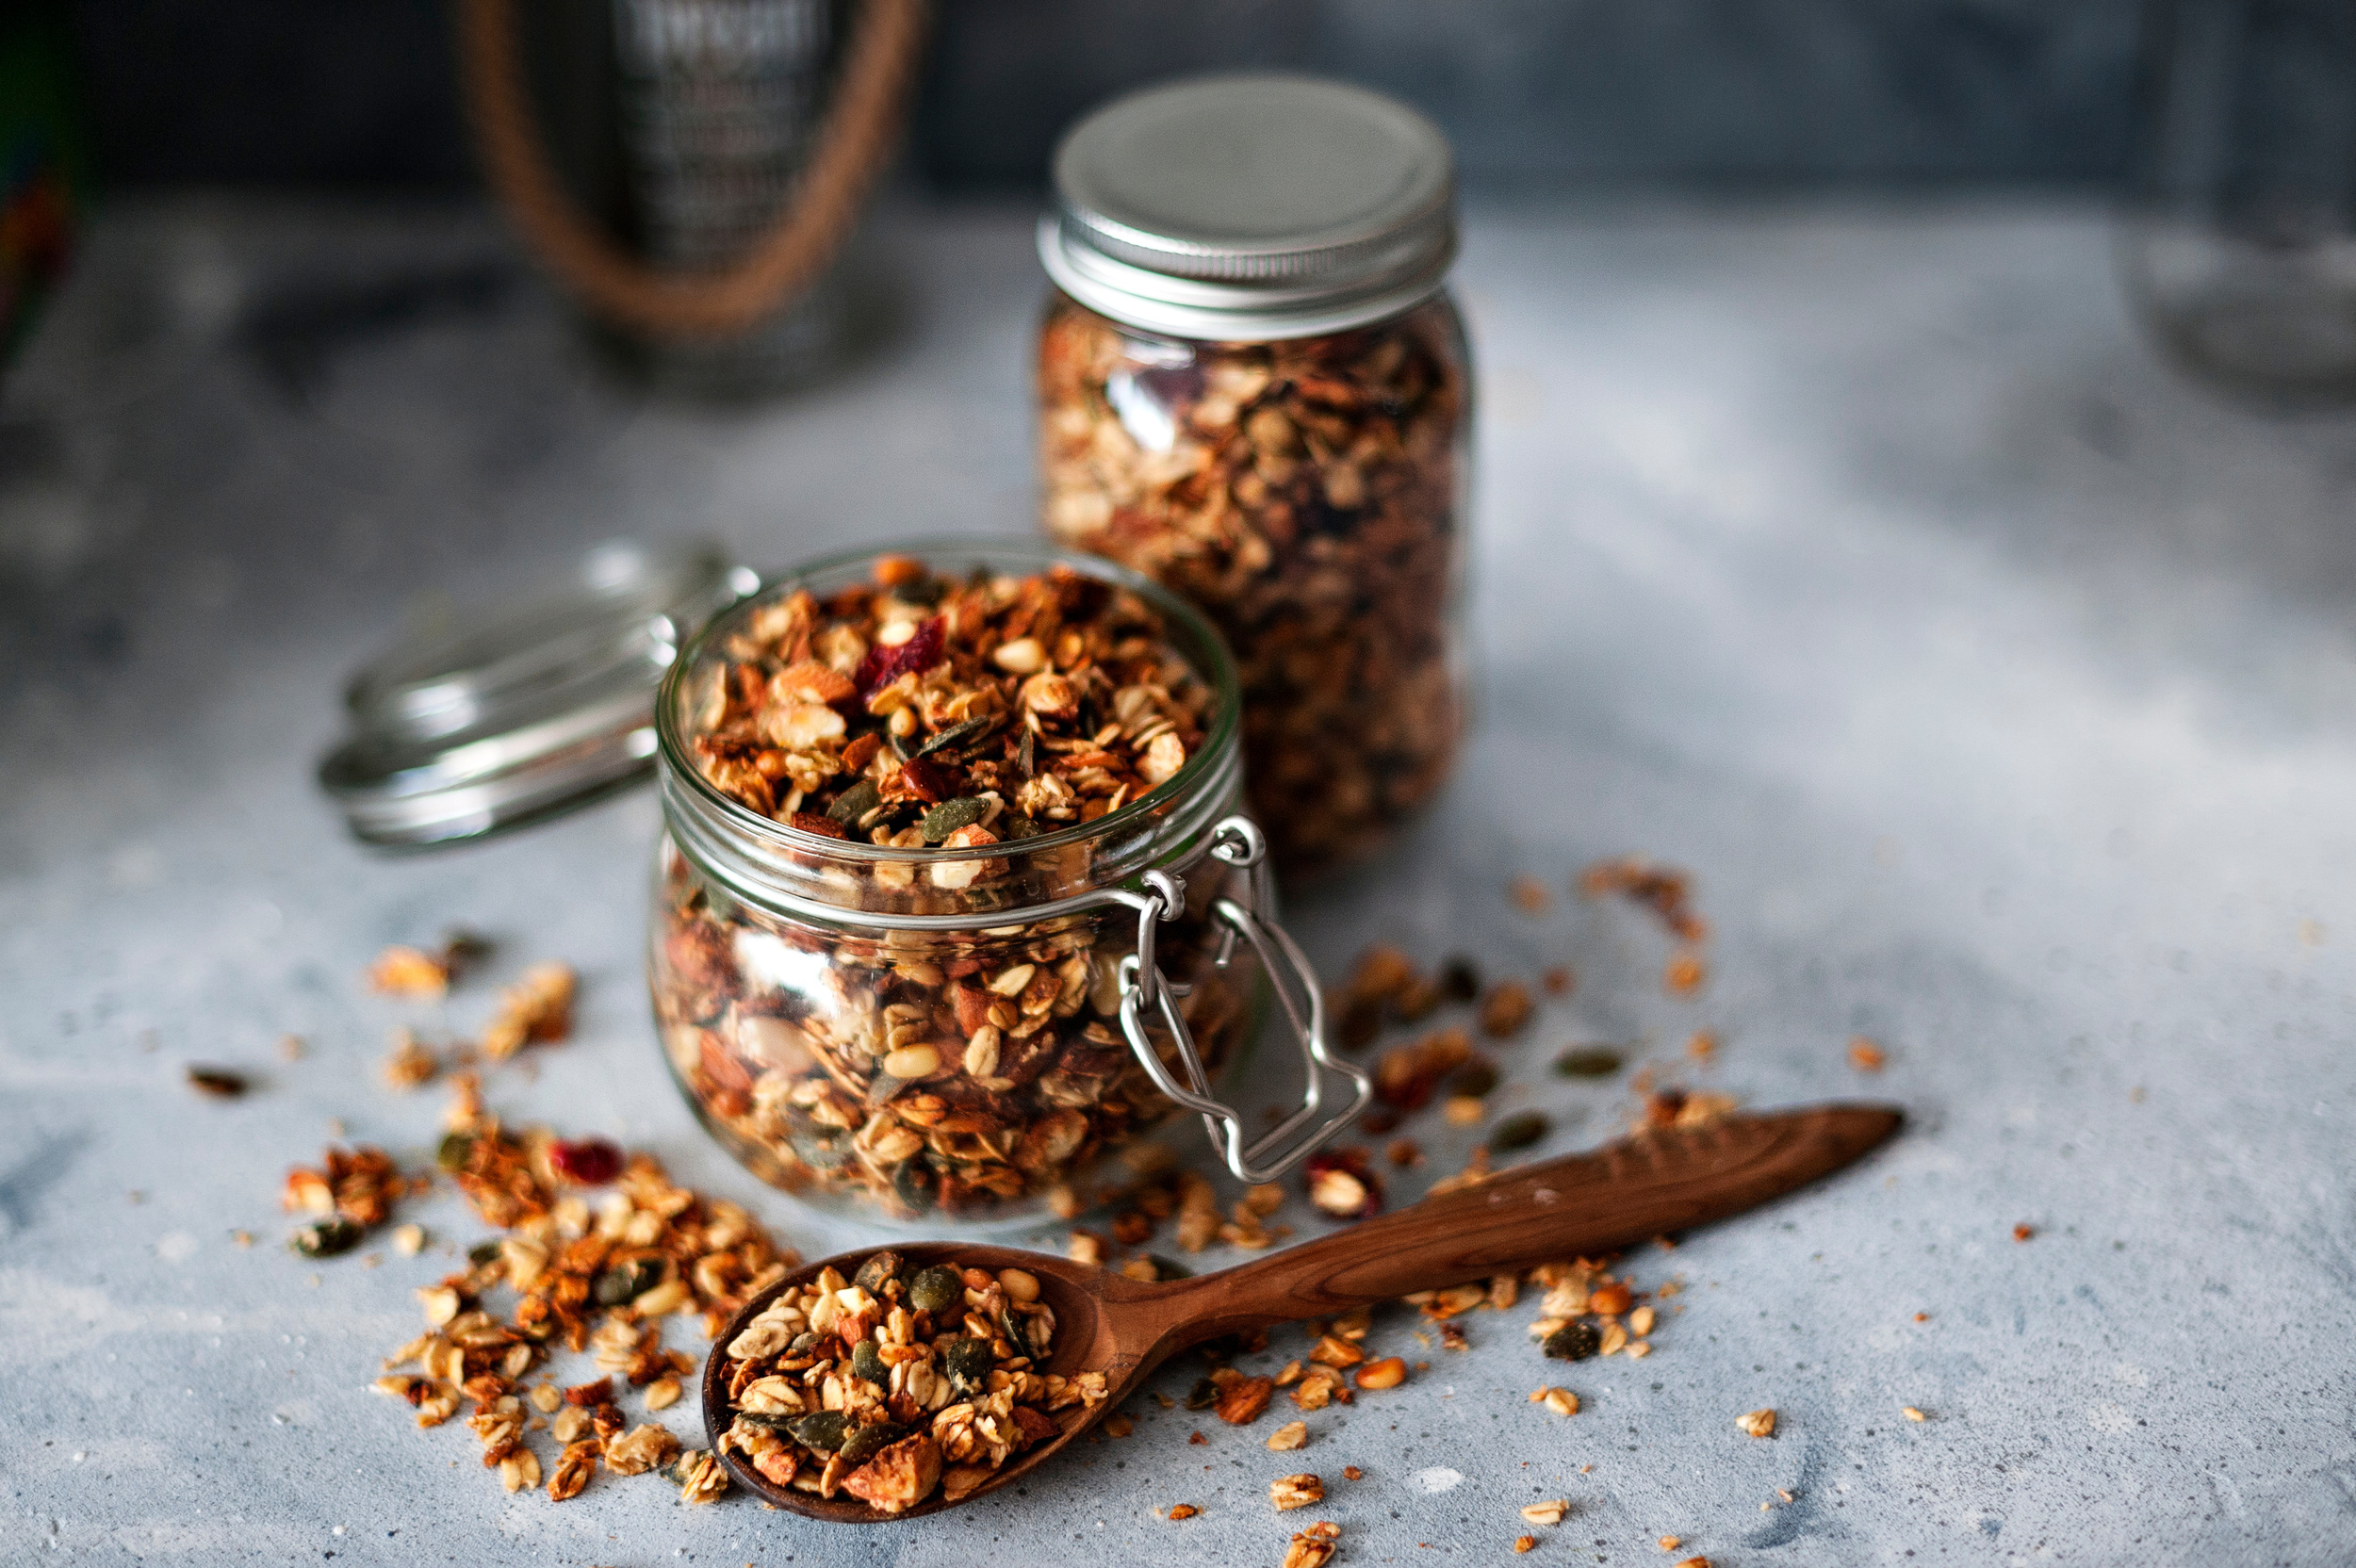 <p>This one’s a given in any trail mix we buy or make. Since we associate trail mixes with physical activity, this calorie-dense and nutrient-packed food—which is generally high in protein and fiber, too—is an essential part of our snack medley.</p><p><a href='https://www.msn.com/en-us/community/channel/vid-cj9pqbr0vn9in2b6ddcd8sfgpfq6x6utp44fssrv6mc2gtybw0us'>Follow us on MSN to see more of our exclusive lifestyle content.</a></p>